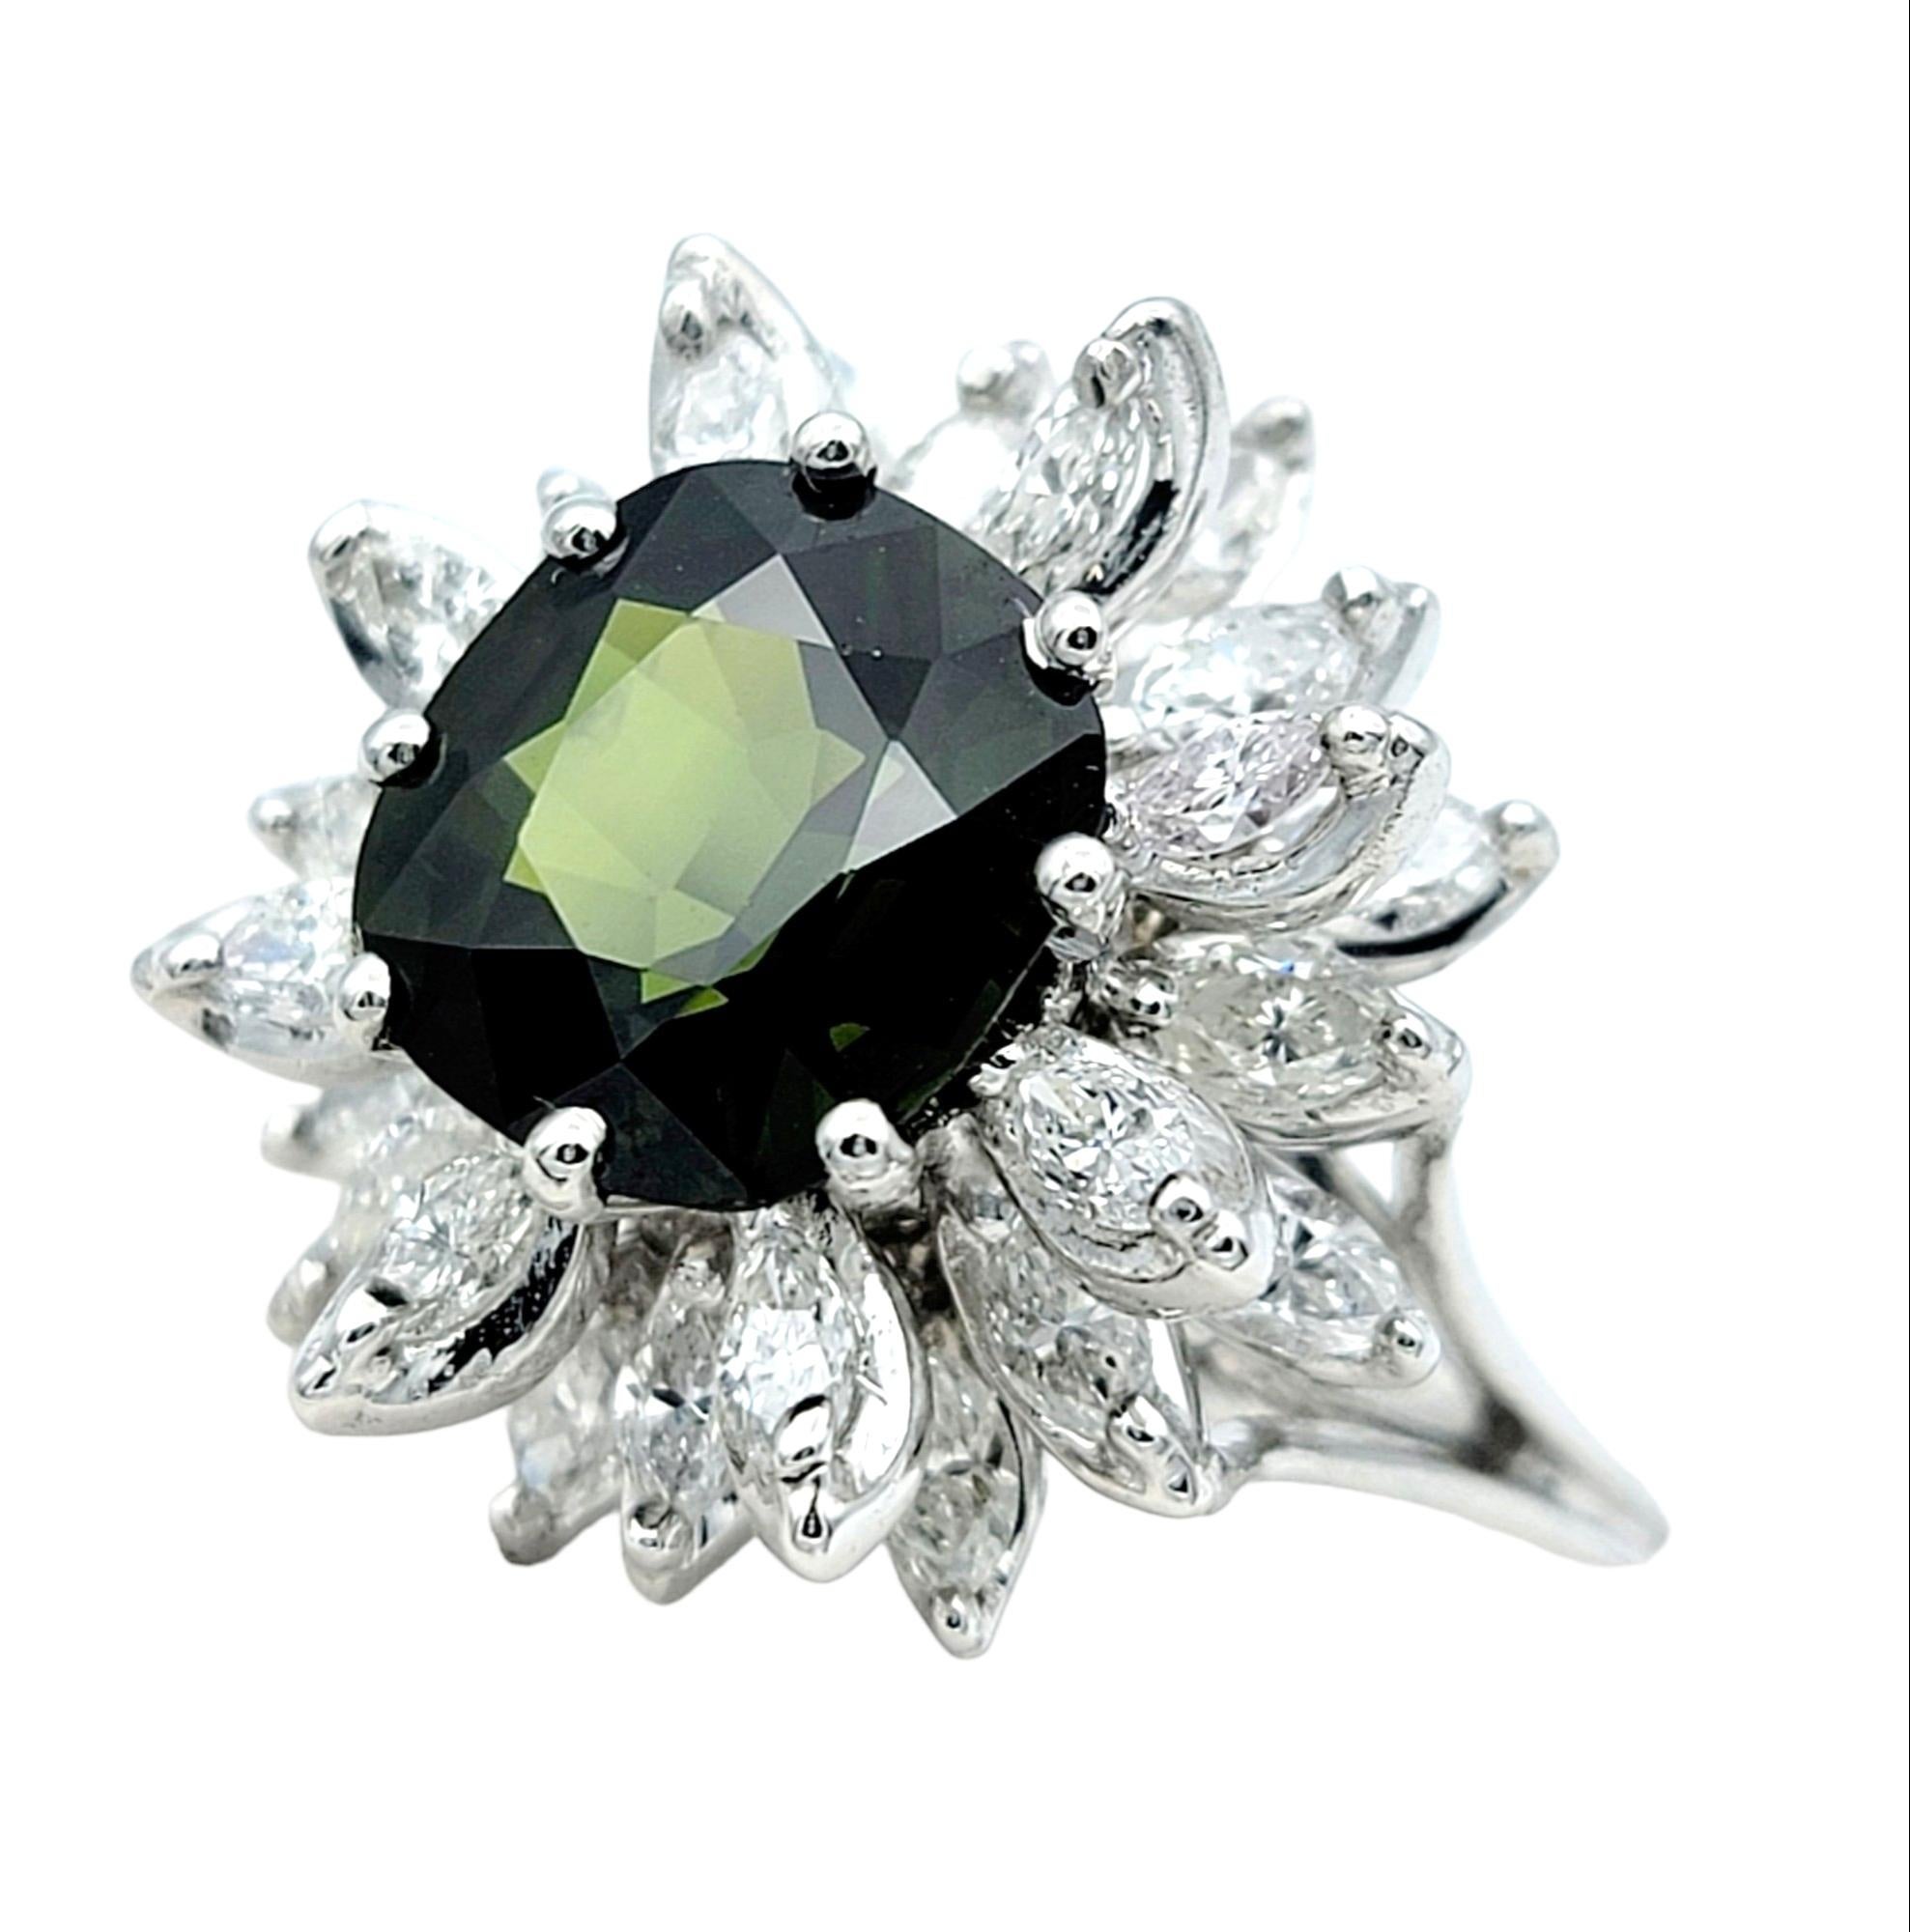 Ring size: 5

This incredible green sapphire and diamond flower cocktail ring is jeweled masterpiece. Crafted in luxurious 14 karat white gold, this stunning ring captures the essence of beauty and grace in every facet.

At its heart, a captivating